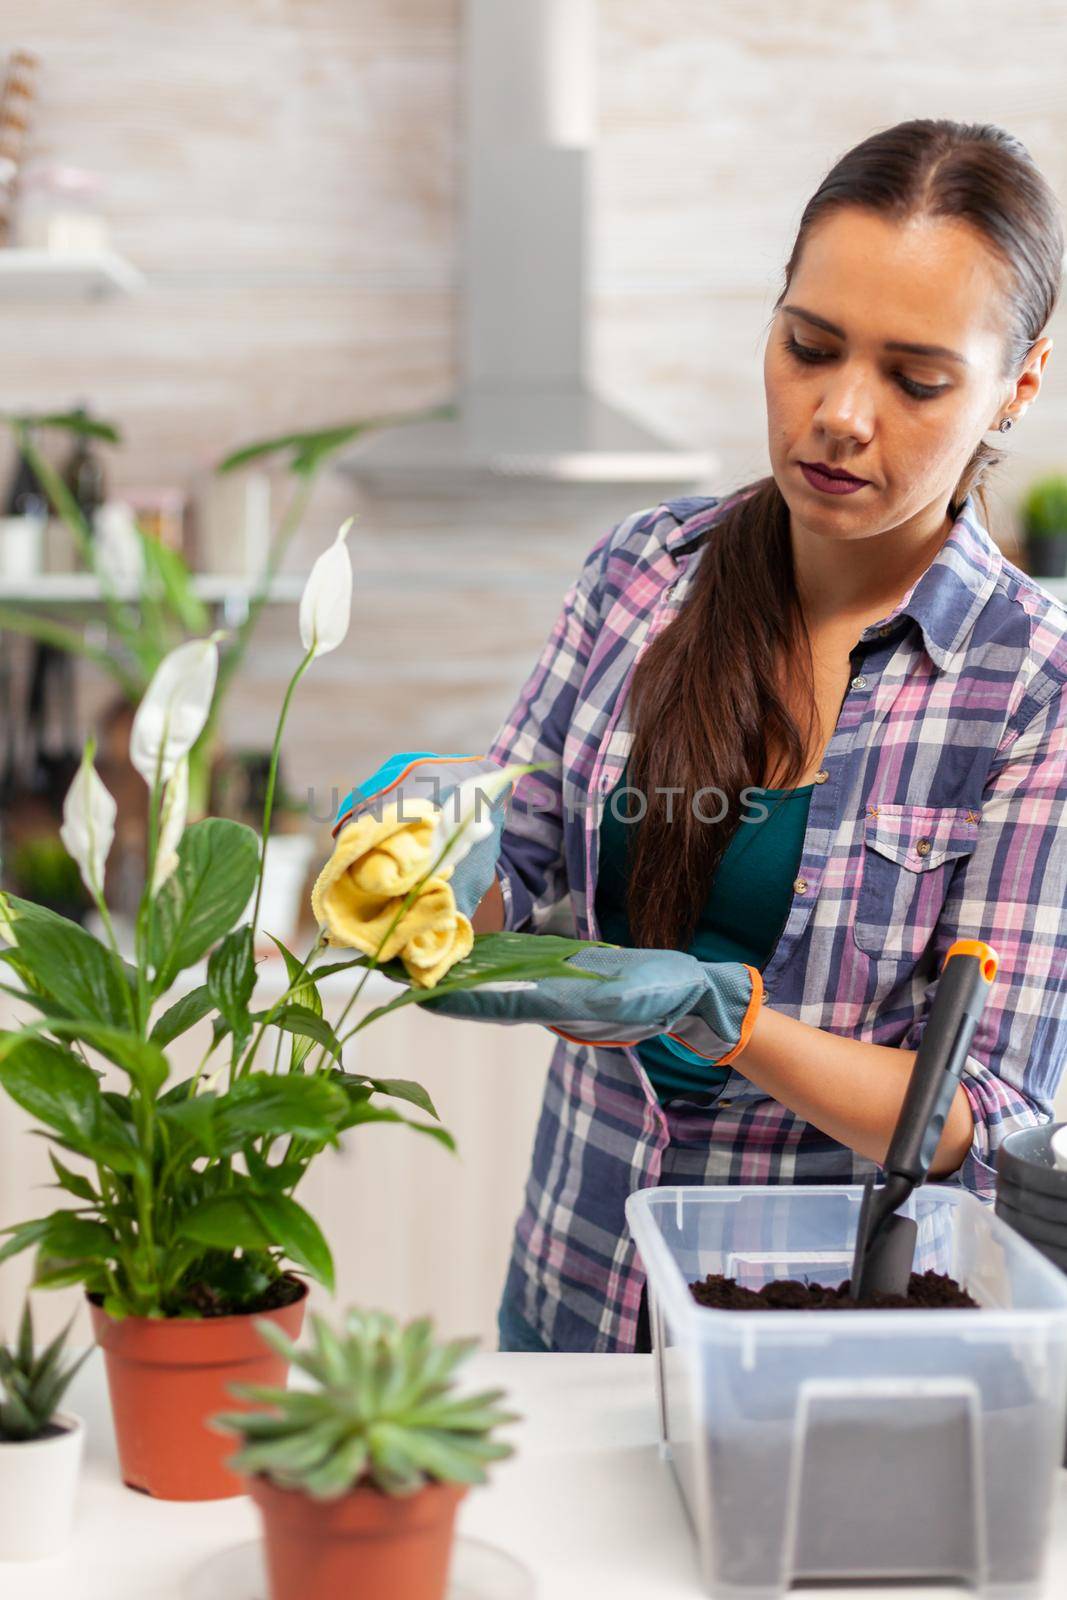 Florist woman wiping flowers leaves on kitchen table in the morning. Using fertil soil with shovel into pot, white ceramic flowerpot and plants prepared for replanting for house decoration caring them